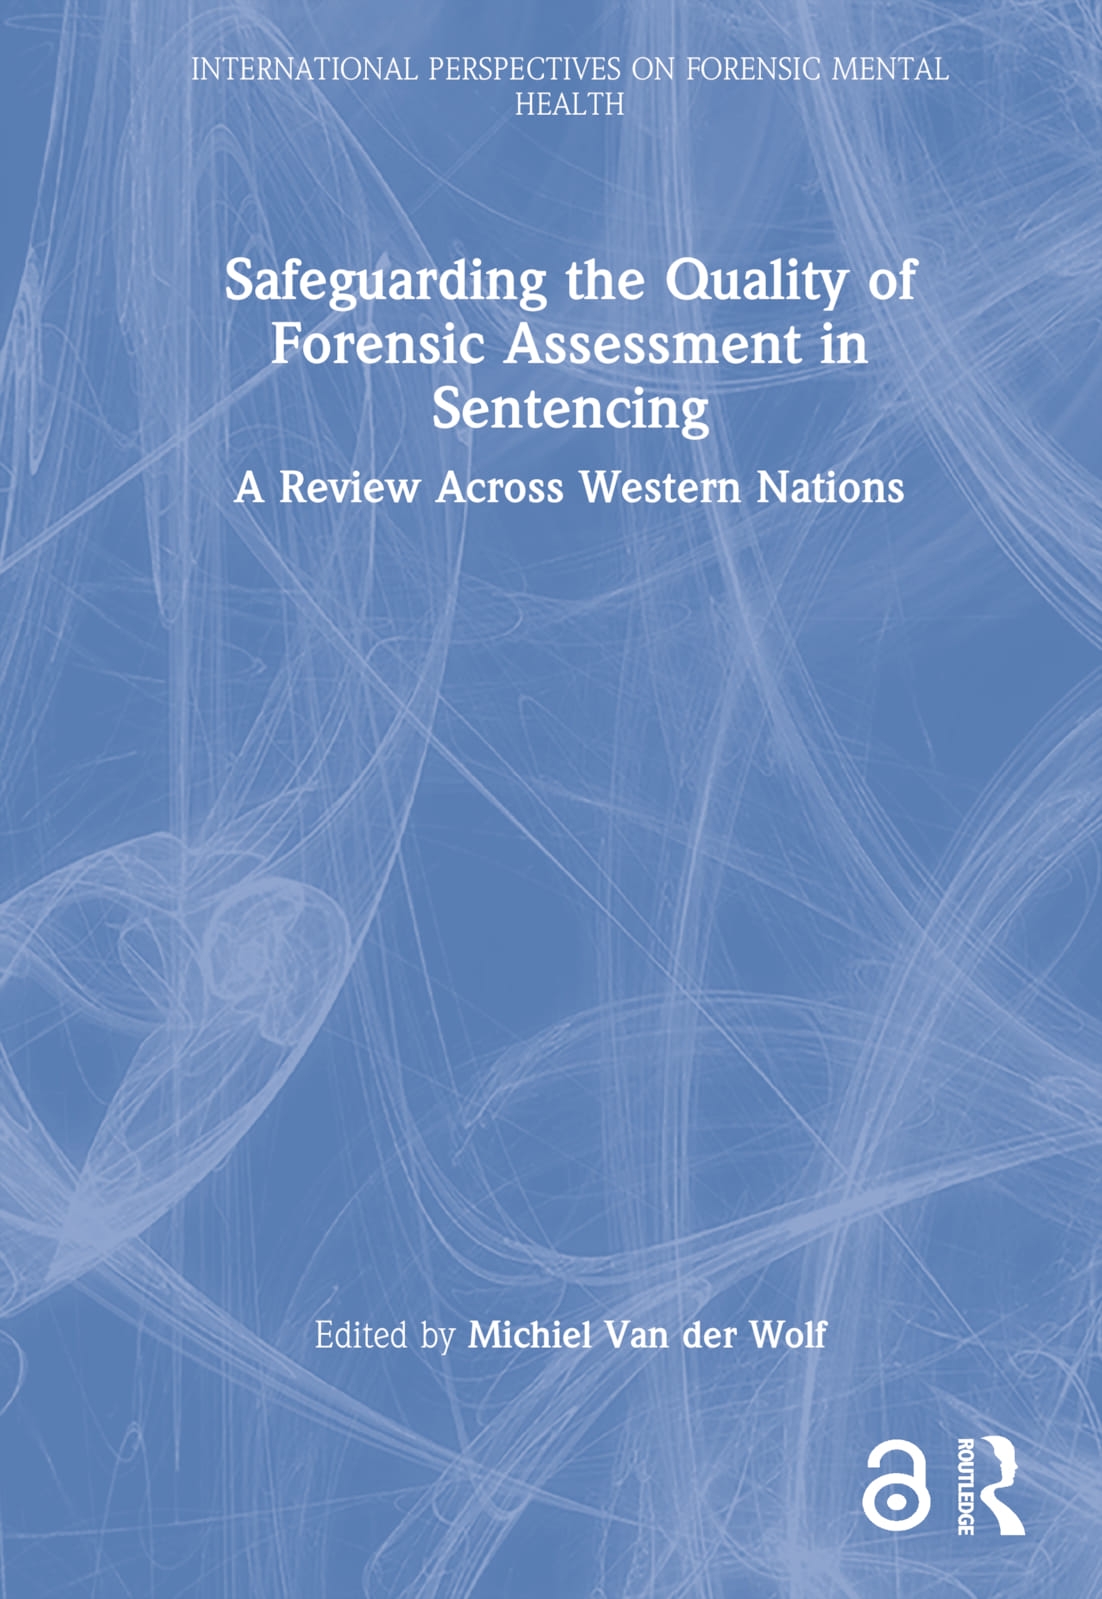 Safeguarding Forensic Violence Risk Assessment: A Review Across Western Nations